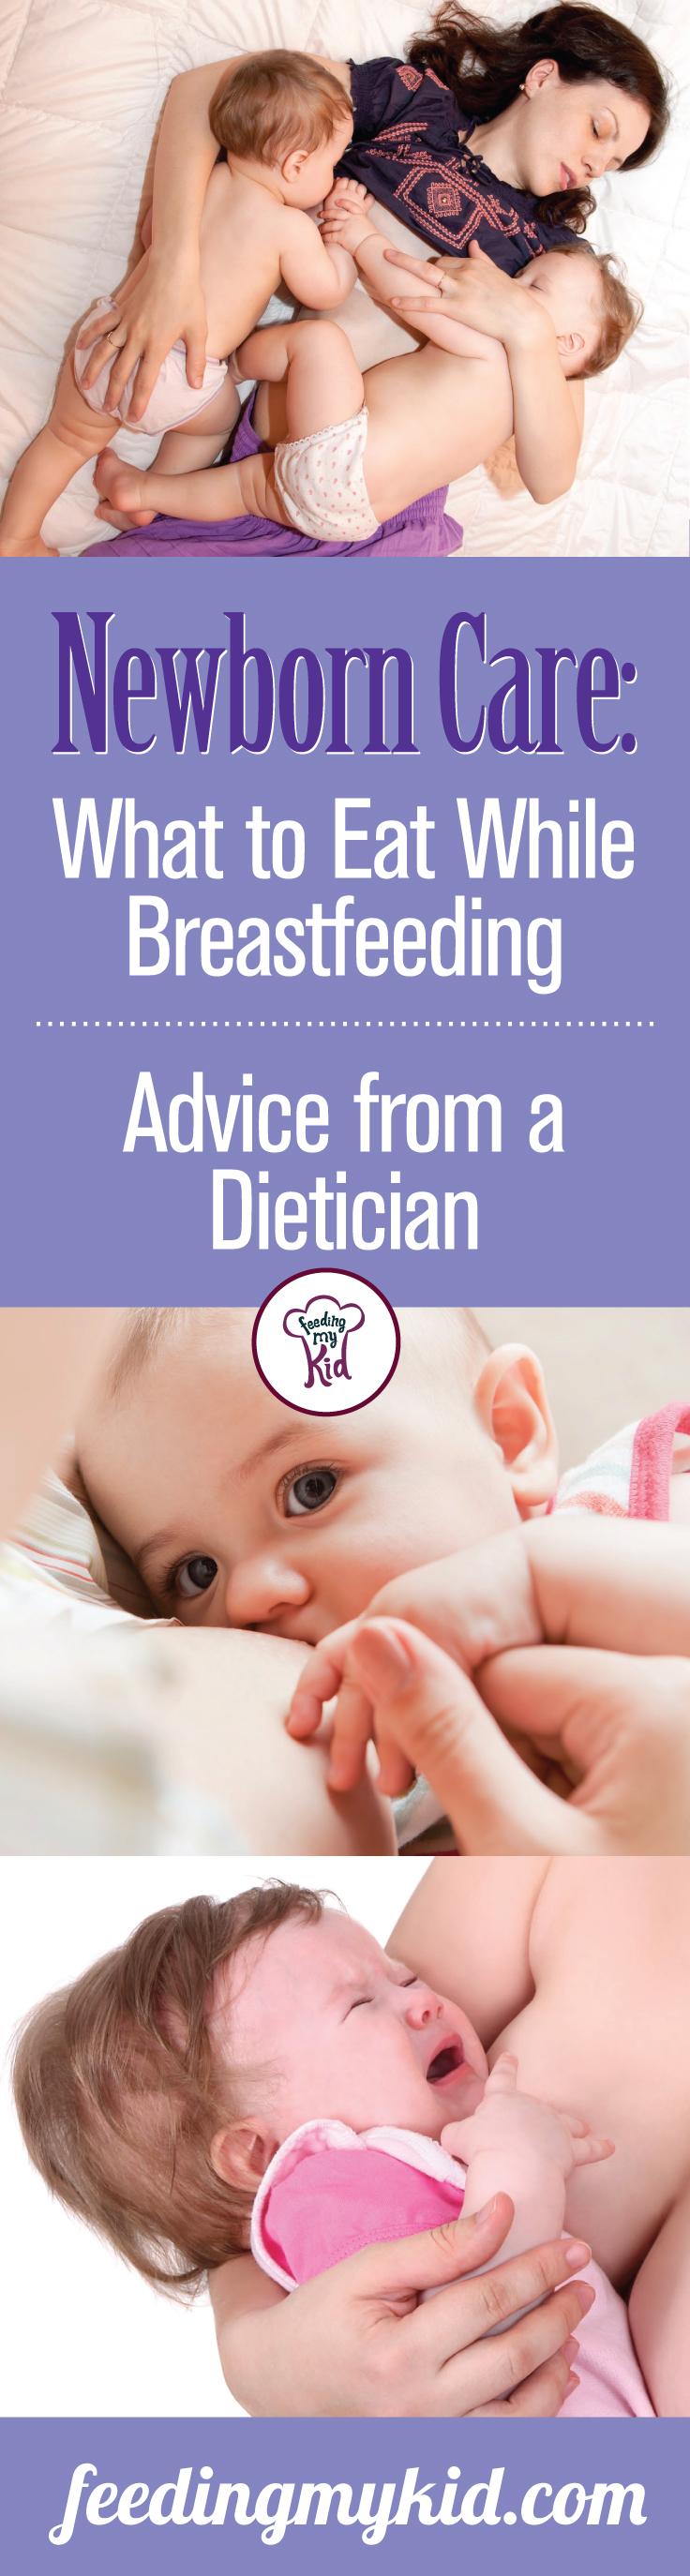 Newborn Care short: What to Eat While Breastfeeding - Learn from a dietician what you should eat in order to stay and shape and produce breastmilk. 